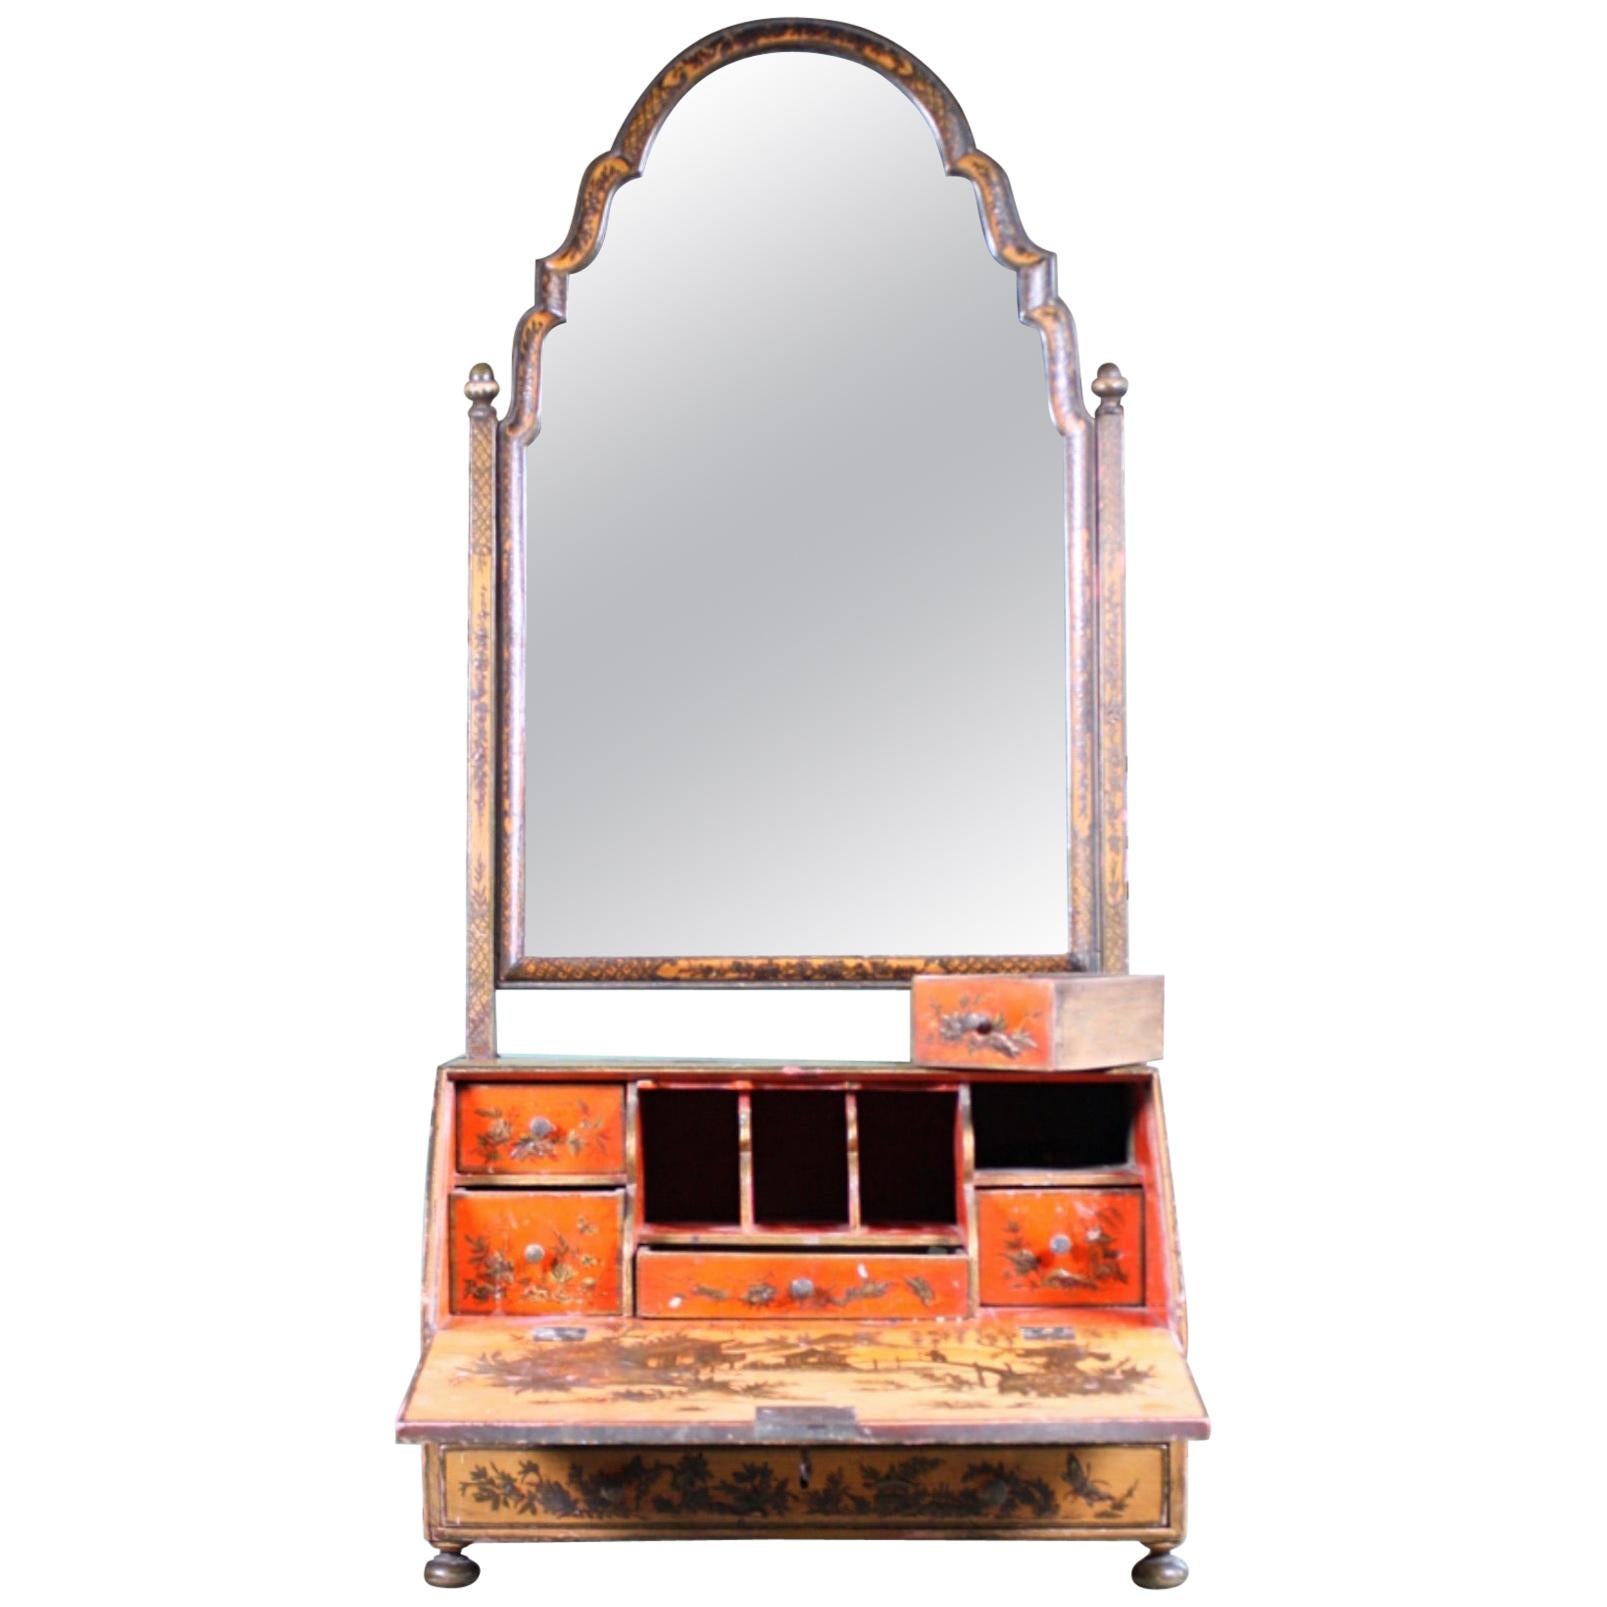 Early 19th Century Regency Country House Chinoiserie Dressing Table Mirror